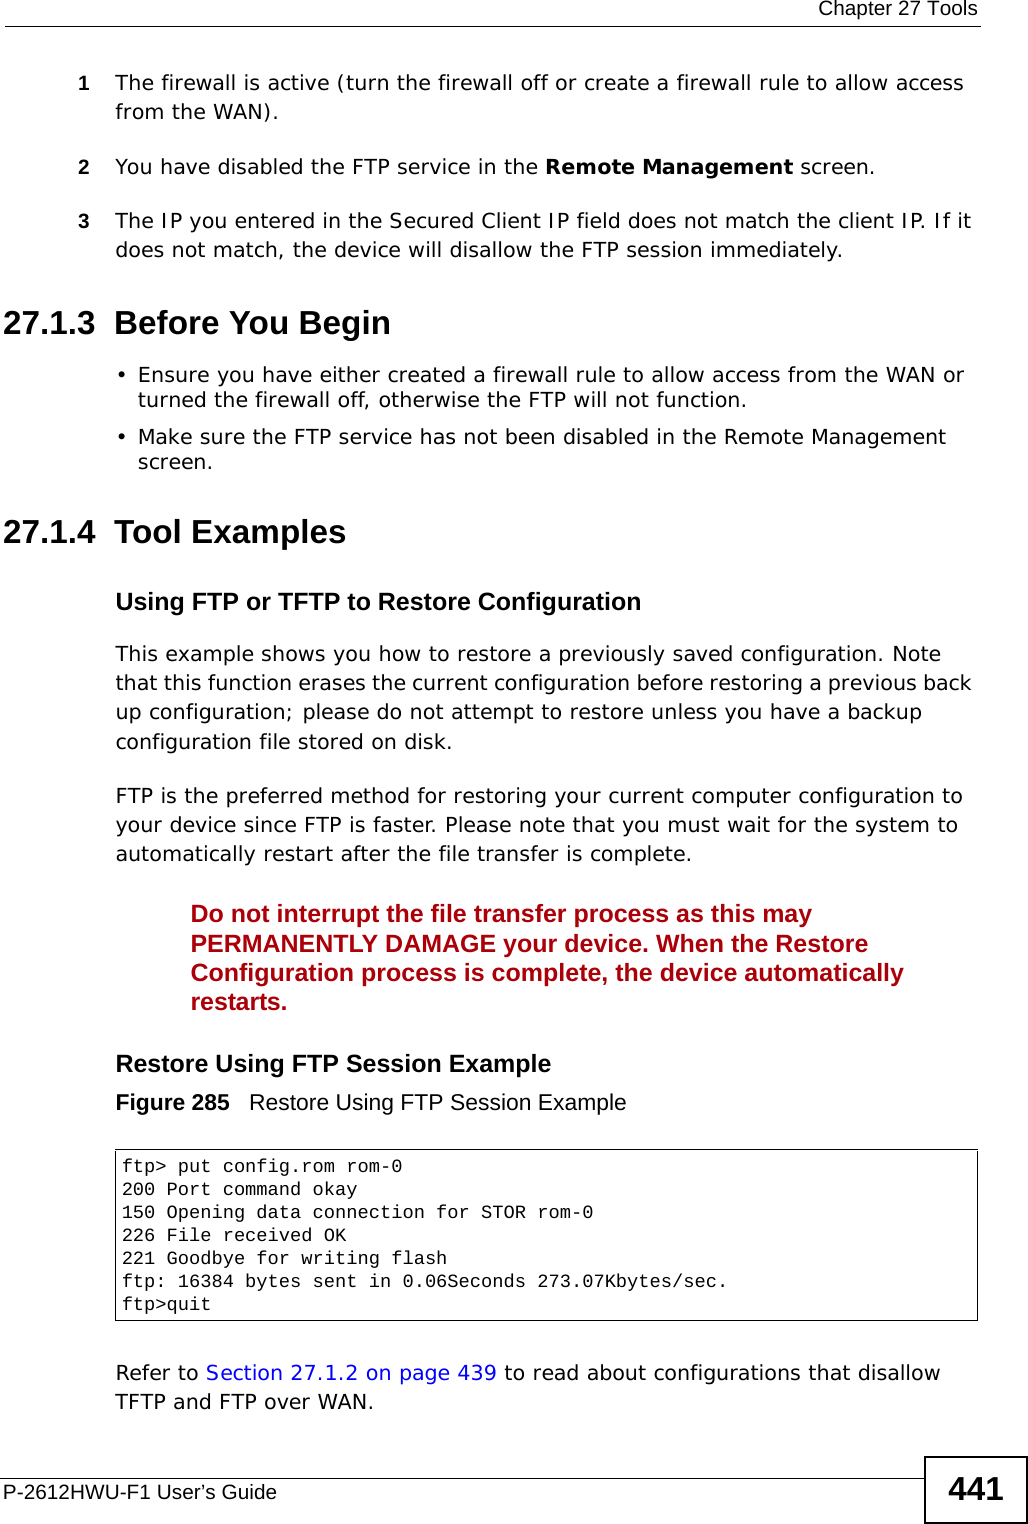  Chapter 27 ToolsP-2612HWU-F1 User’s Guide 4411The firewall is active (turn the firewall off or create a firewall rule to allow access from the WAN).2You have disabled the FTP service in the Remote Management screen. 3The IP you entered in the Secured Client IP field does not match the client IP. If it does not match, the device will disallow the FTP session immediately.27.1.3  Before You Begin• Ensure you have either created a firewall rule to allow access from the WAN or turned the firewall off, otherwise the FTP will not function.• Make sure the FTP service has not been disabled in the Remote Management screen.27.1.4  Tool ExamplesUsing FTP or TFTP to Restore Configuration This example shows you how to restore a previously saved configuration. Note that this function erases the current configuration before restoring a previous back up configuration; please do not attempt to restore unless you have a backup configuration file stored on disk. FTP is the preferred method for restoring your current computer configuration to your device since FTP is faster. Please note that you must wait for the system to automatically restart after the file transfer is complete.Do not interrupt the file transfer process as this may PERMANENTLY DAMAGE your device. When the Restore Configuration process is complete, the device automatically restarts.Restore Using FTP Session ExampleFigure 285   Restore Using FTP Session ExampleRefer to Section 27.1.2 on page 439 to read about configurations that disallow TFTP and FTP over WAN.ftp&gt; put config.rom rom-0200 Port command okay150 Opening data connection for STOR rom-0226 File received OK221 Goodbye for writing flashftp: 16384 bytes sent in 0.06Seconds 273.07Kbytes/sec.ftp&gt;quit